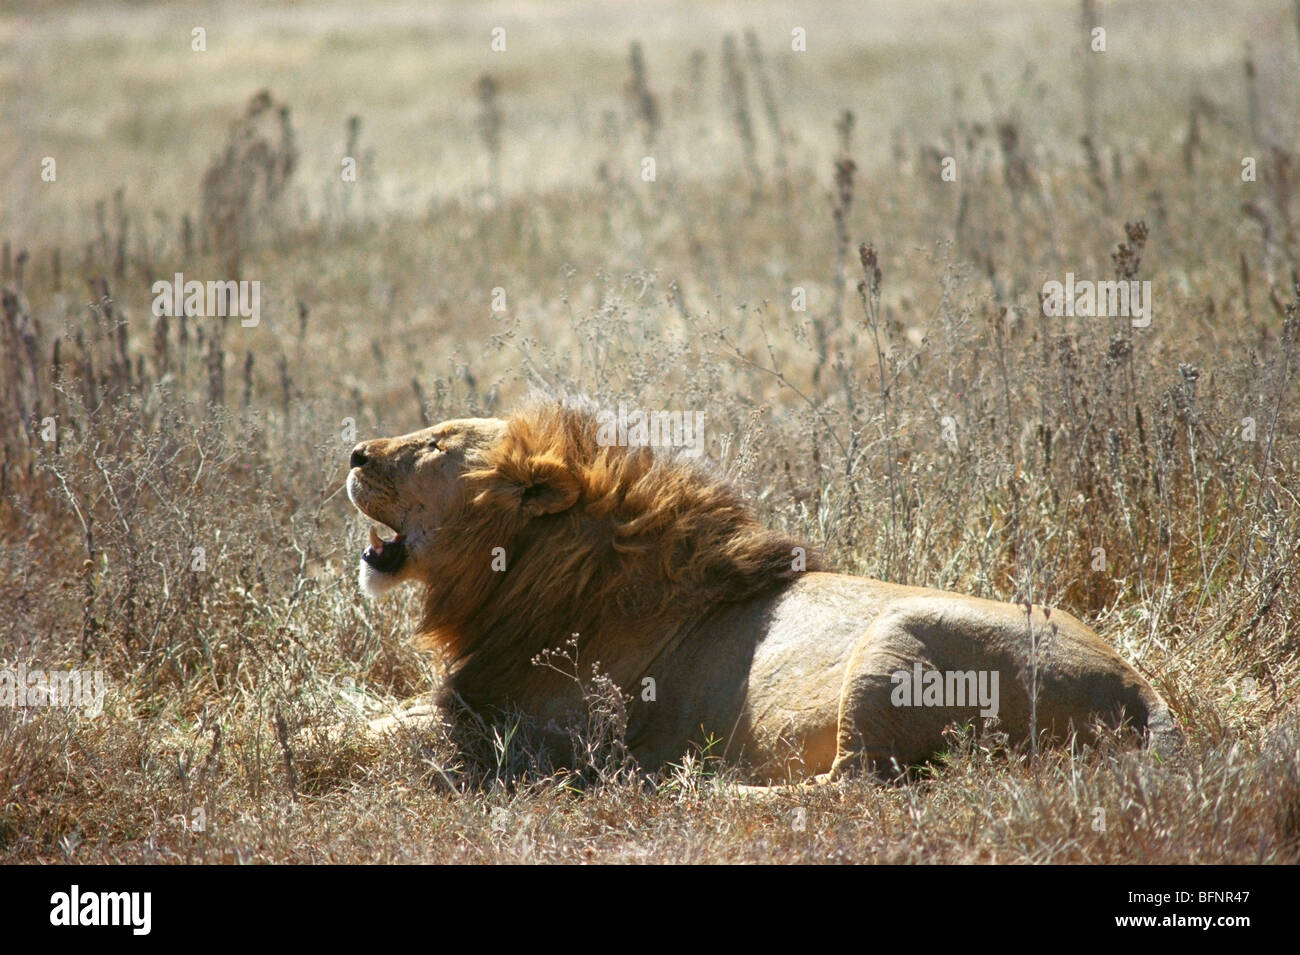 Lion resting in Ngorongoro crater in Tanzania Africa Stock Photo